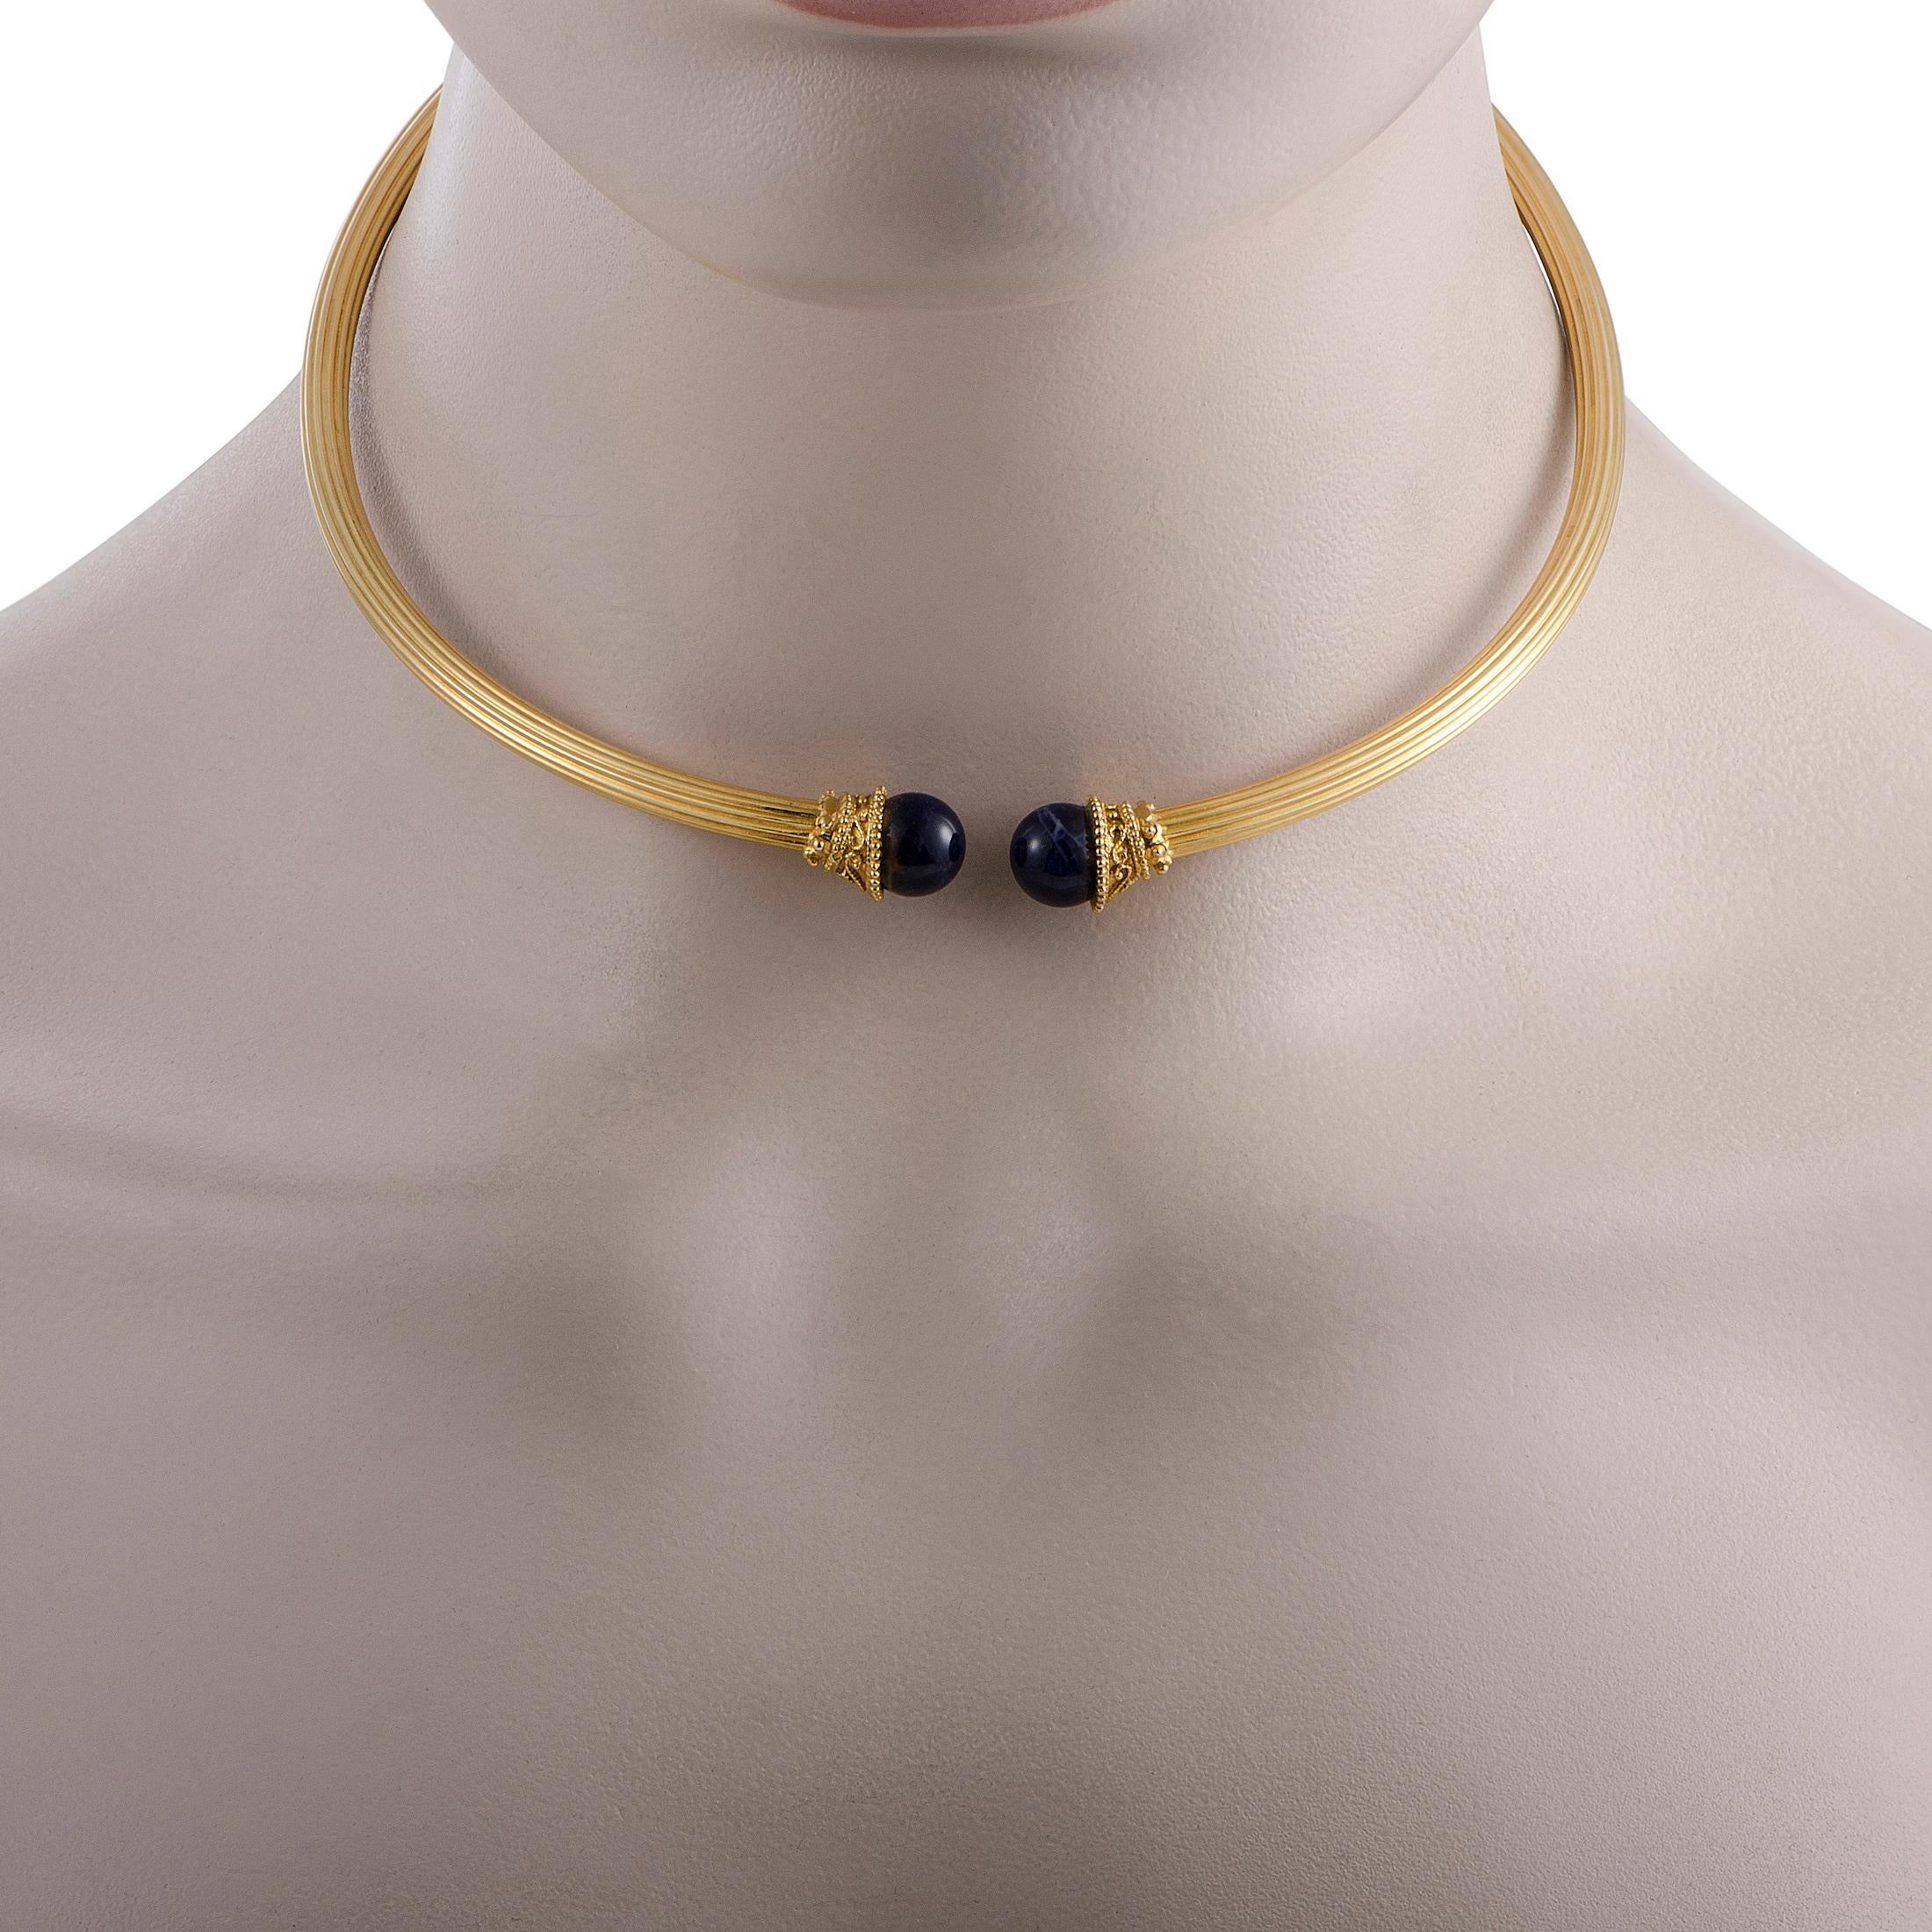 Add an exceptionally sophisticated touch to your ensembles with this classy piece from Ilias Lalaounis that features an incredibly refined design accentuated by two eye-catching lapis lazuli stones. The necklace is beautifully made of luxurious 18K